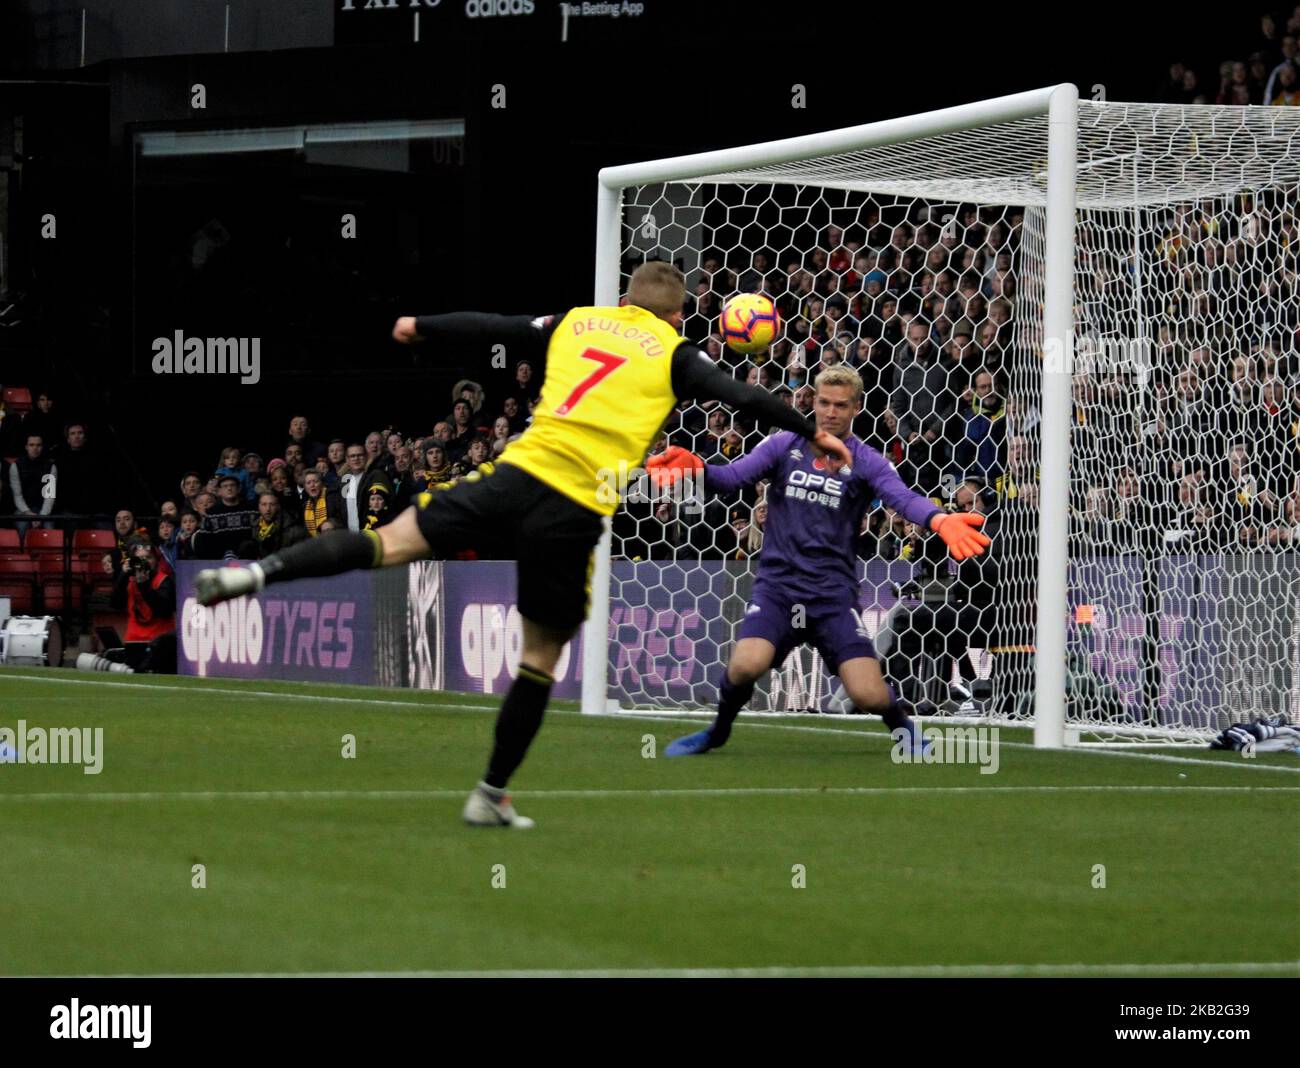 Watford, UK, 27 October, 2018. Gerard Deulofeu puts the ball past Goalkeeper Jonas Lossl to score during Premier League match between Watford and Huddersfield Town at Vicarage Road, Watford, England on 27 Oct 2018. (Photo by Action Foto Sport/NurPhoto) Stock Photo